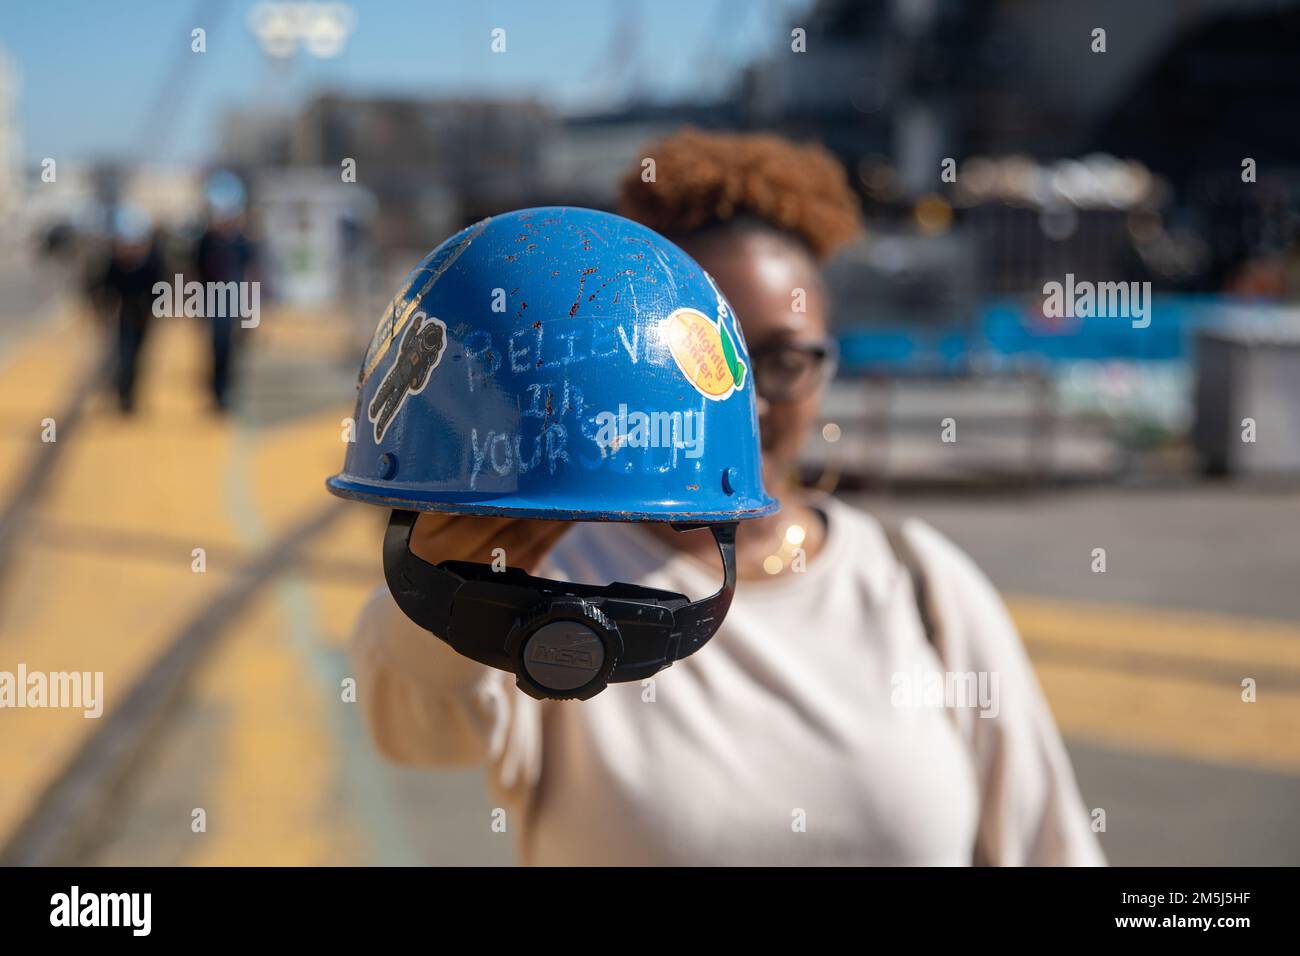 “Believe in yourself.” These are words Insulator Jacqueline Winborne lives by, the phrase etched in her hard hat to echo her beliefs. A recent graduate of the Norfolk Naval Shipyard (NNSY) Apprenticeship Program, she takes on each day staying true to her ideals. Through her service and dedication to the shipyard’s mission and to her team, Winborne was recently nominated for the Virginia Department of Labor (DOL) and Industry’s Division of Registered Apprenticeship Outstanding Apprentice of the Year for 2021 – becoming the third individual from the Insulator Shop (Shop 57) to win the title acro Stock Photo